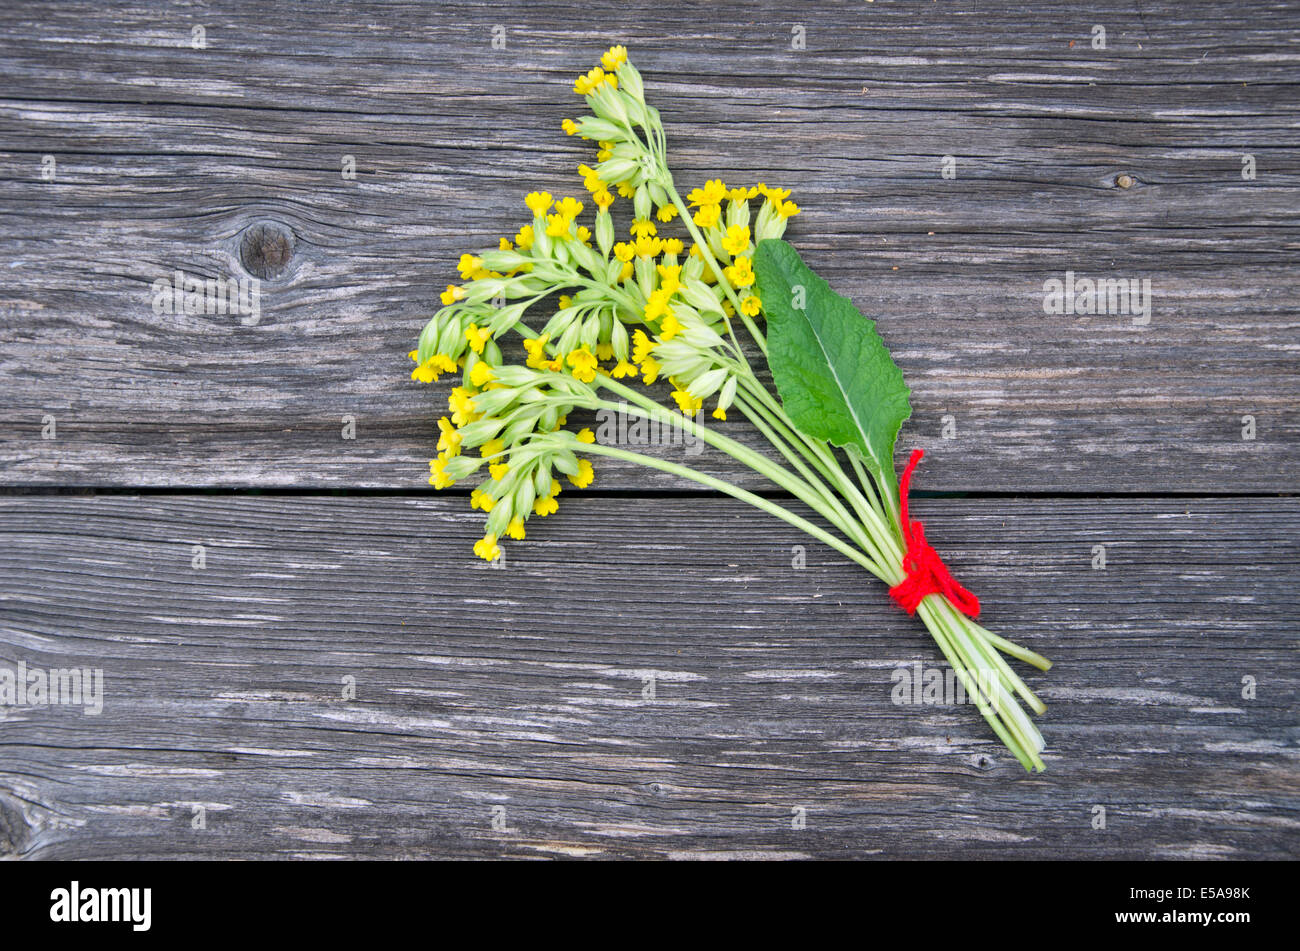 Common Cowslip Primrosa ( Primula veris) medical flowers bunch  on old wooden board Stock Photo